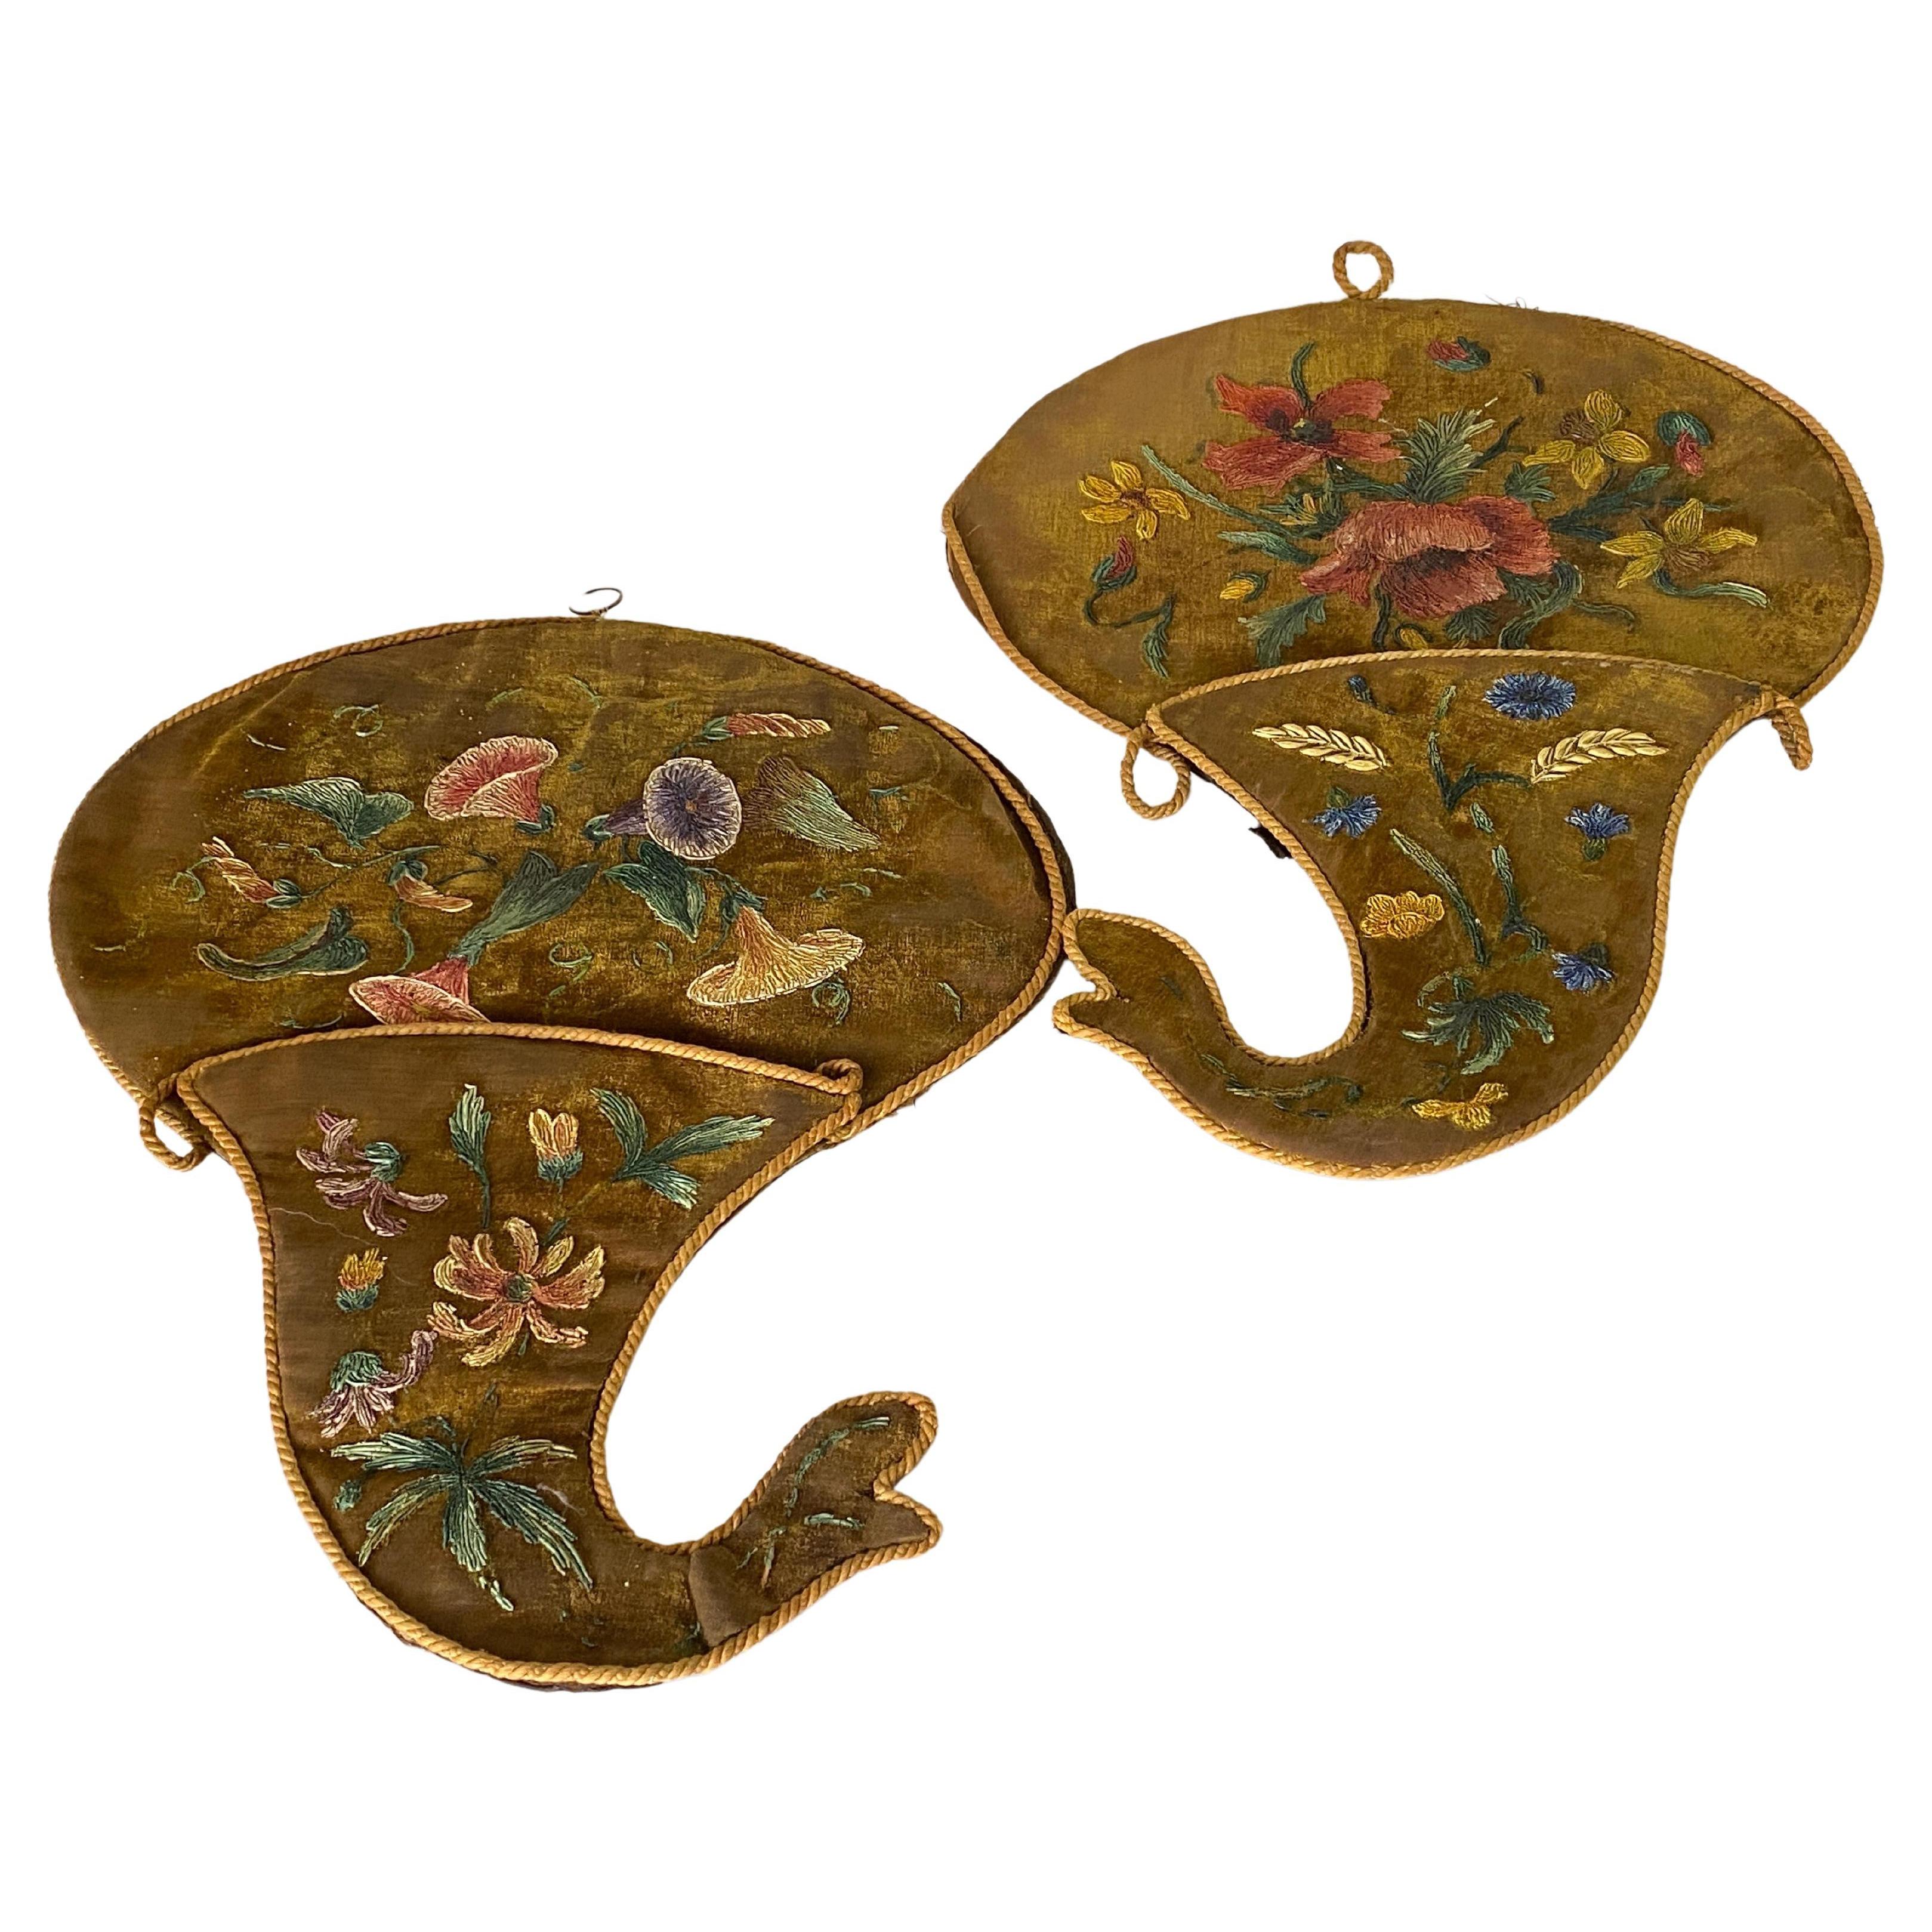 Wall Letter Holder in Embroidery on Fabric, with Floral Decorations 19th Century